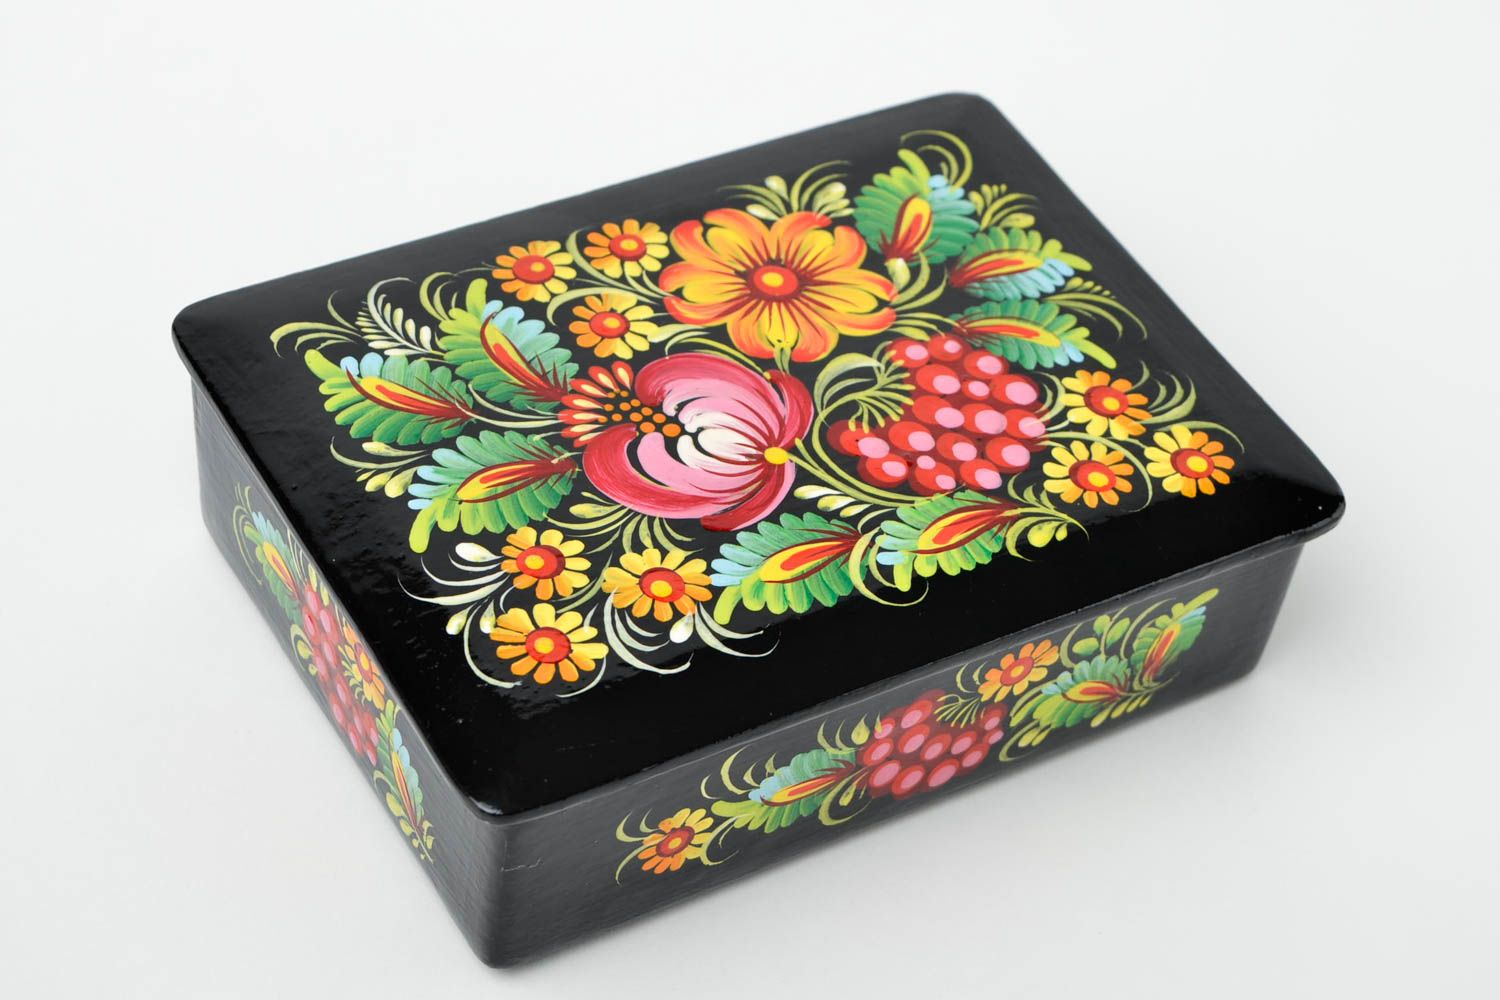 Homemade jewellery box jewelry gift boxes souvenir ideas wooden gifts  photo 3